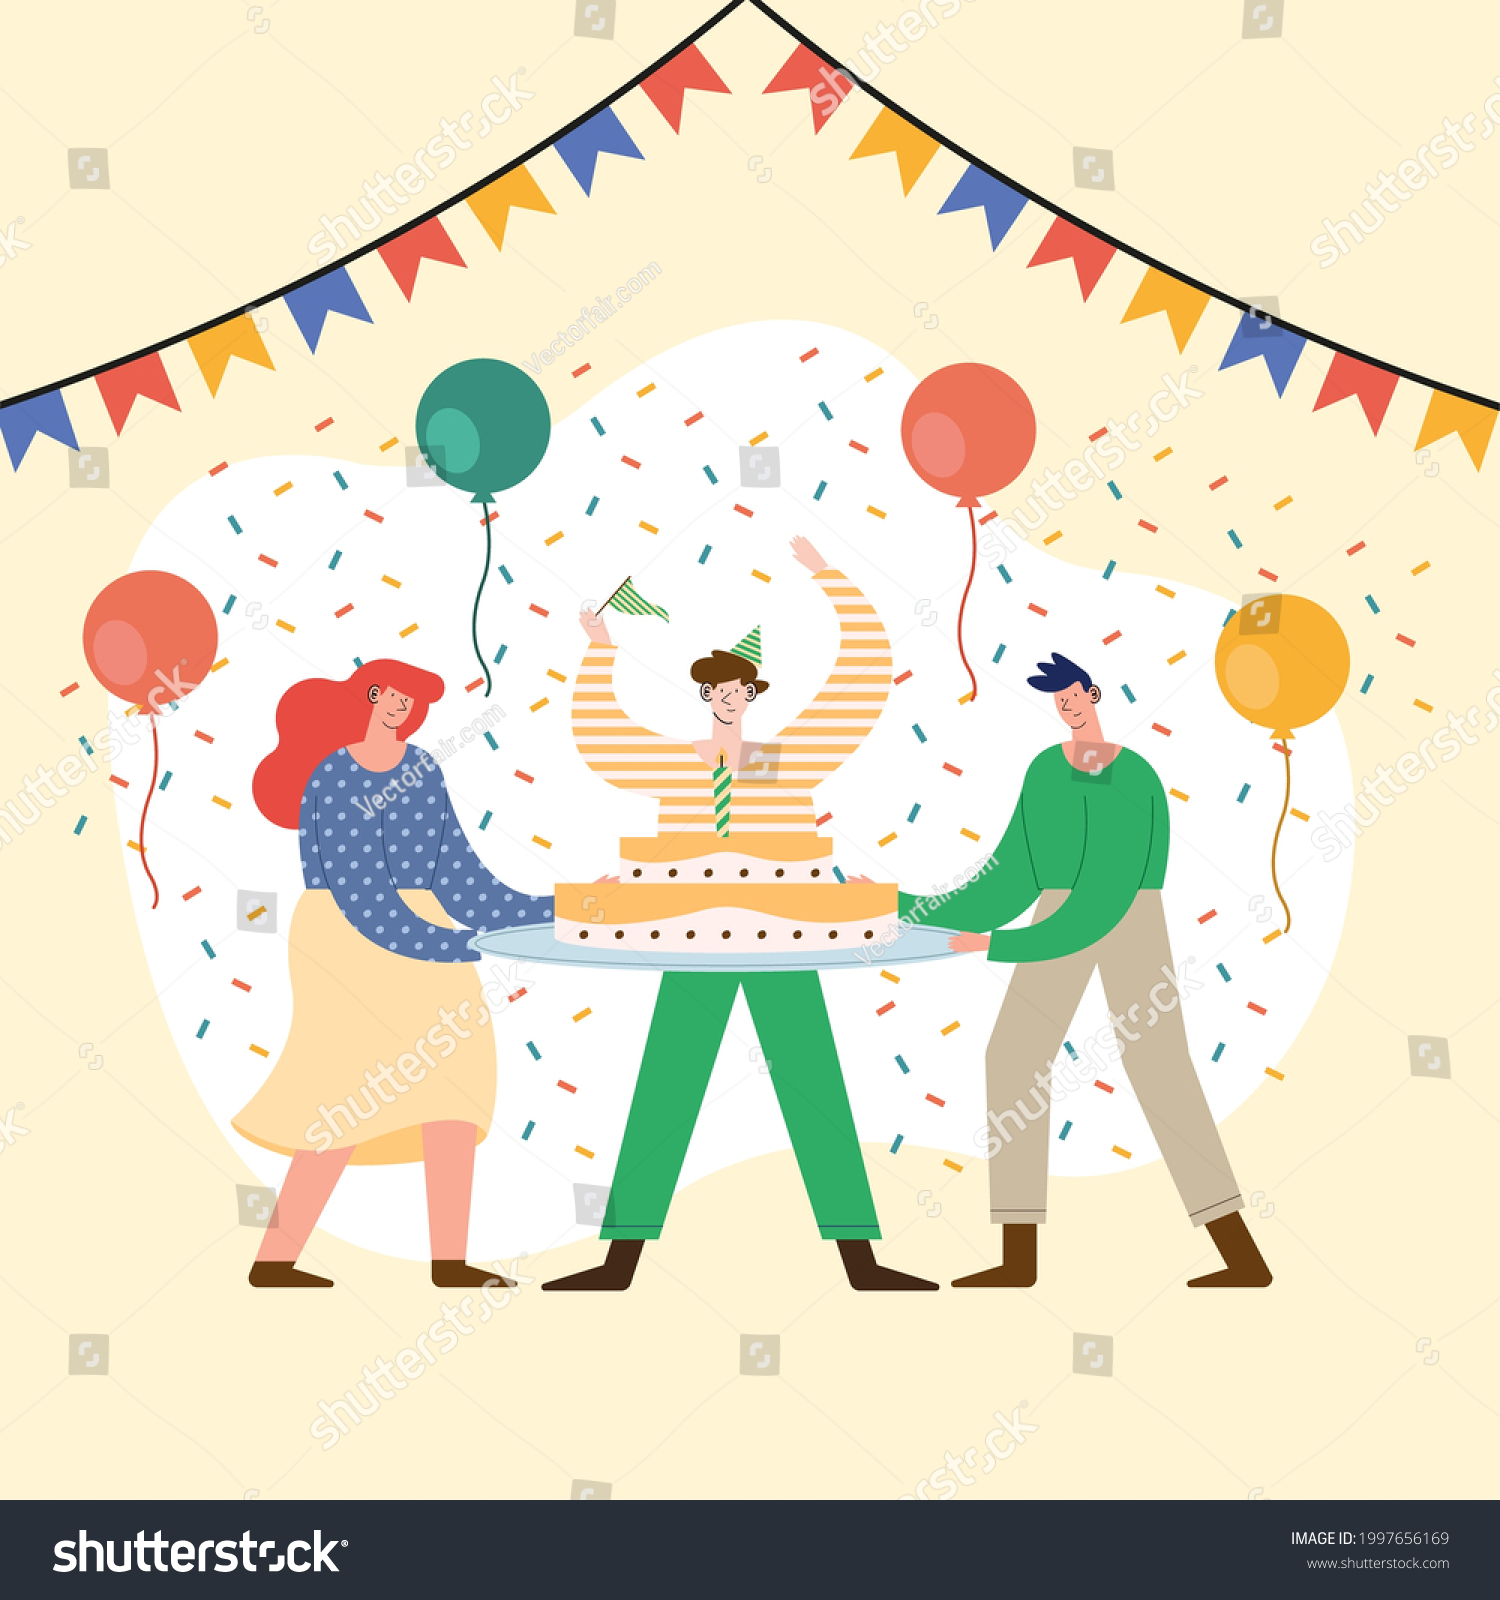 Three Persons Celebrating Birhtday Party Characters Stock Vector ...